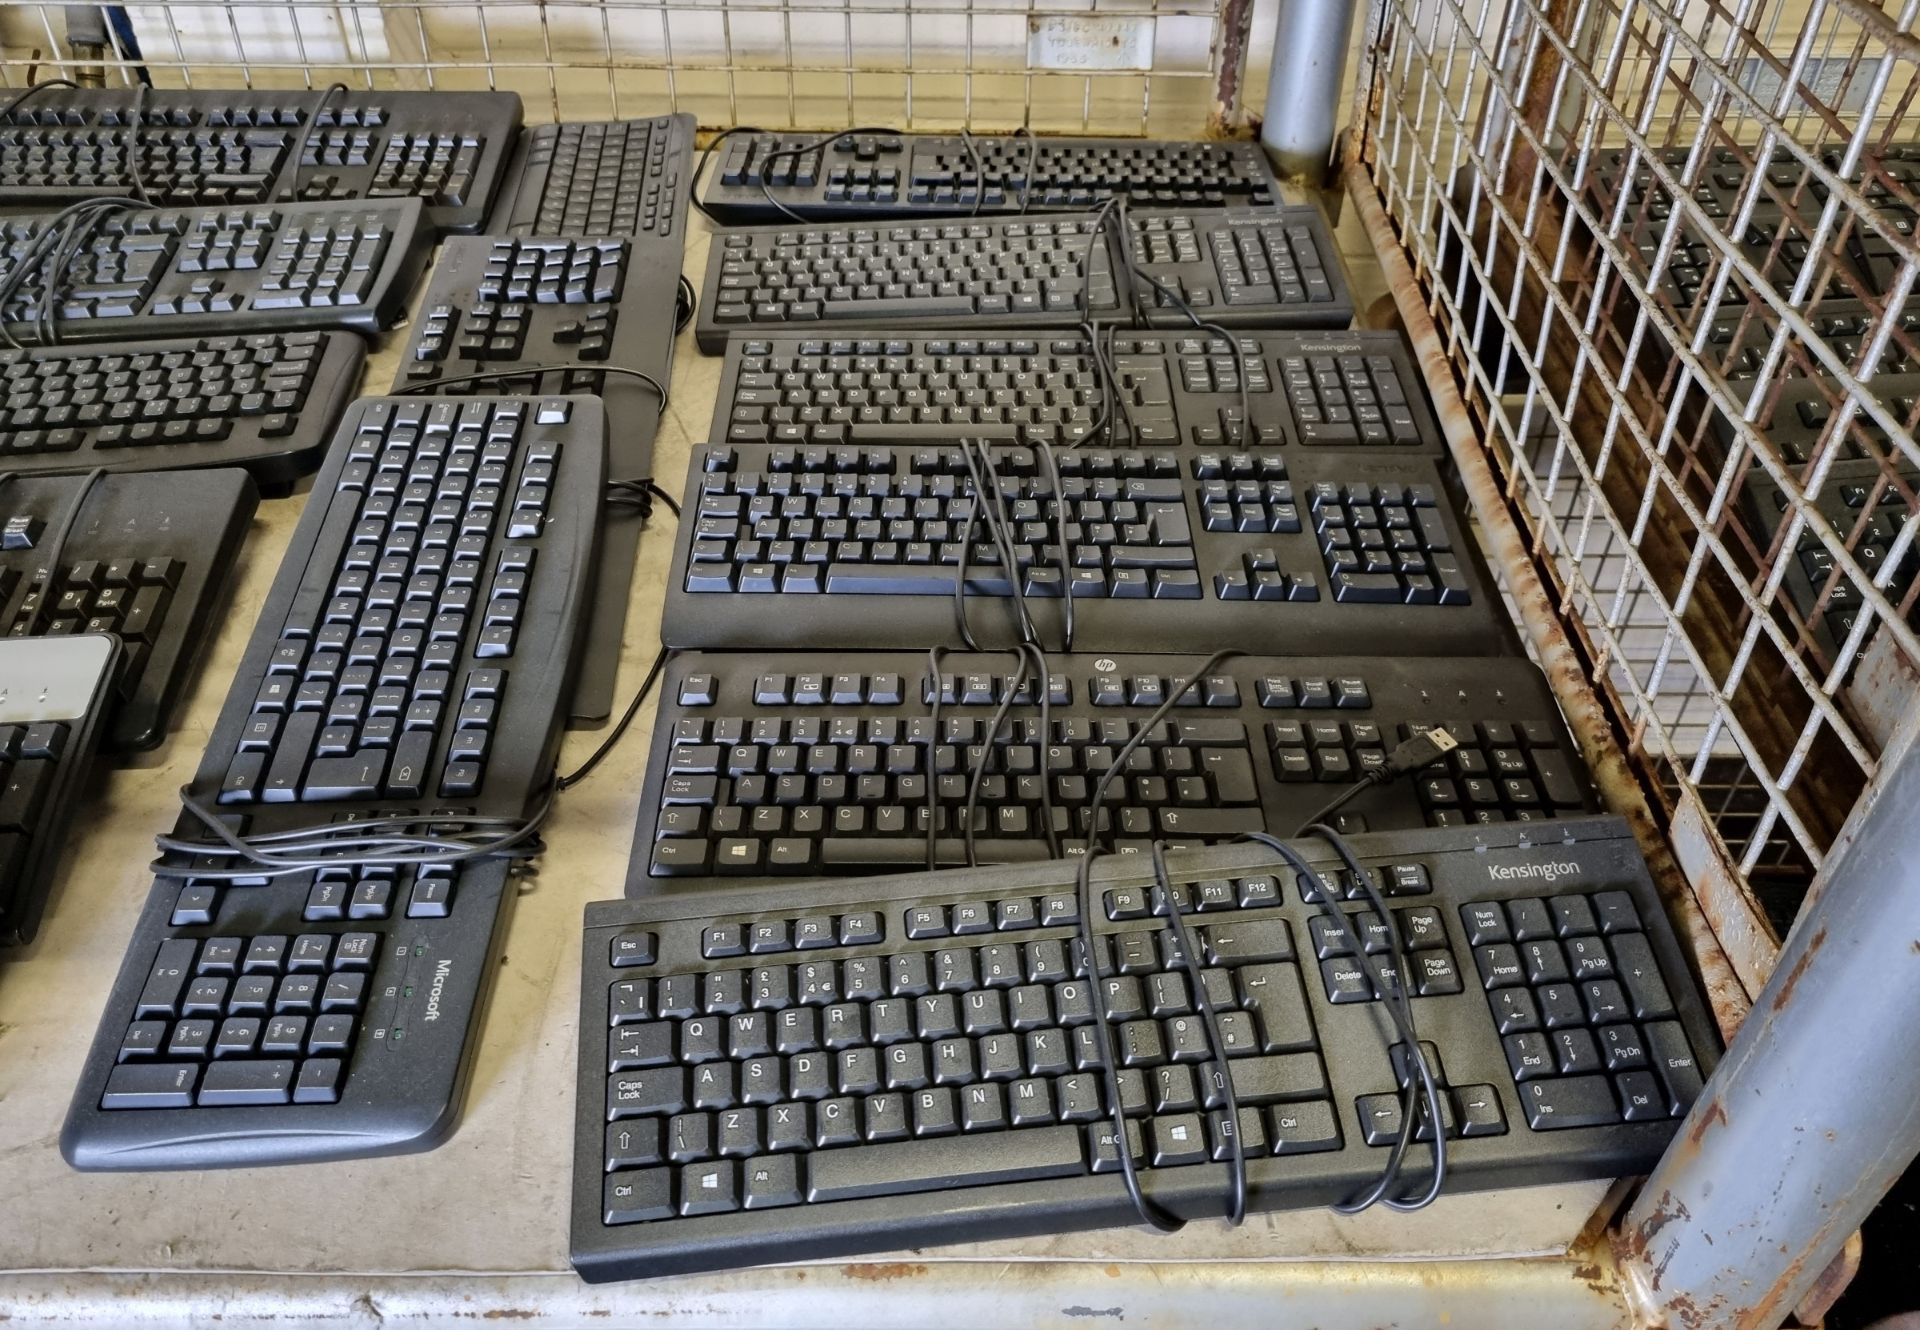 15x computer keyboards of multiple makes - HP, Cherry, Lenovo, Microsoft and Kensington - Image 2 of 3